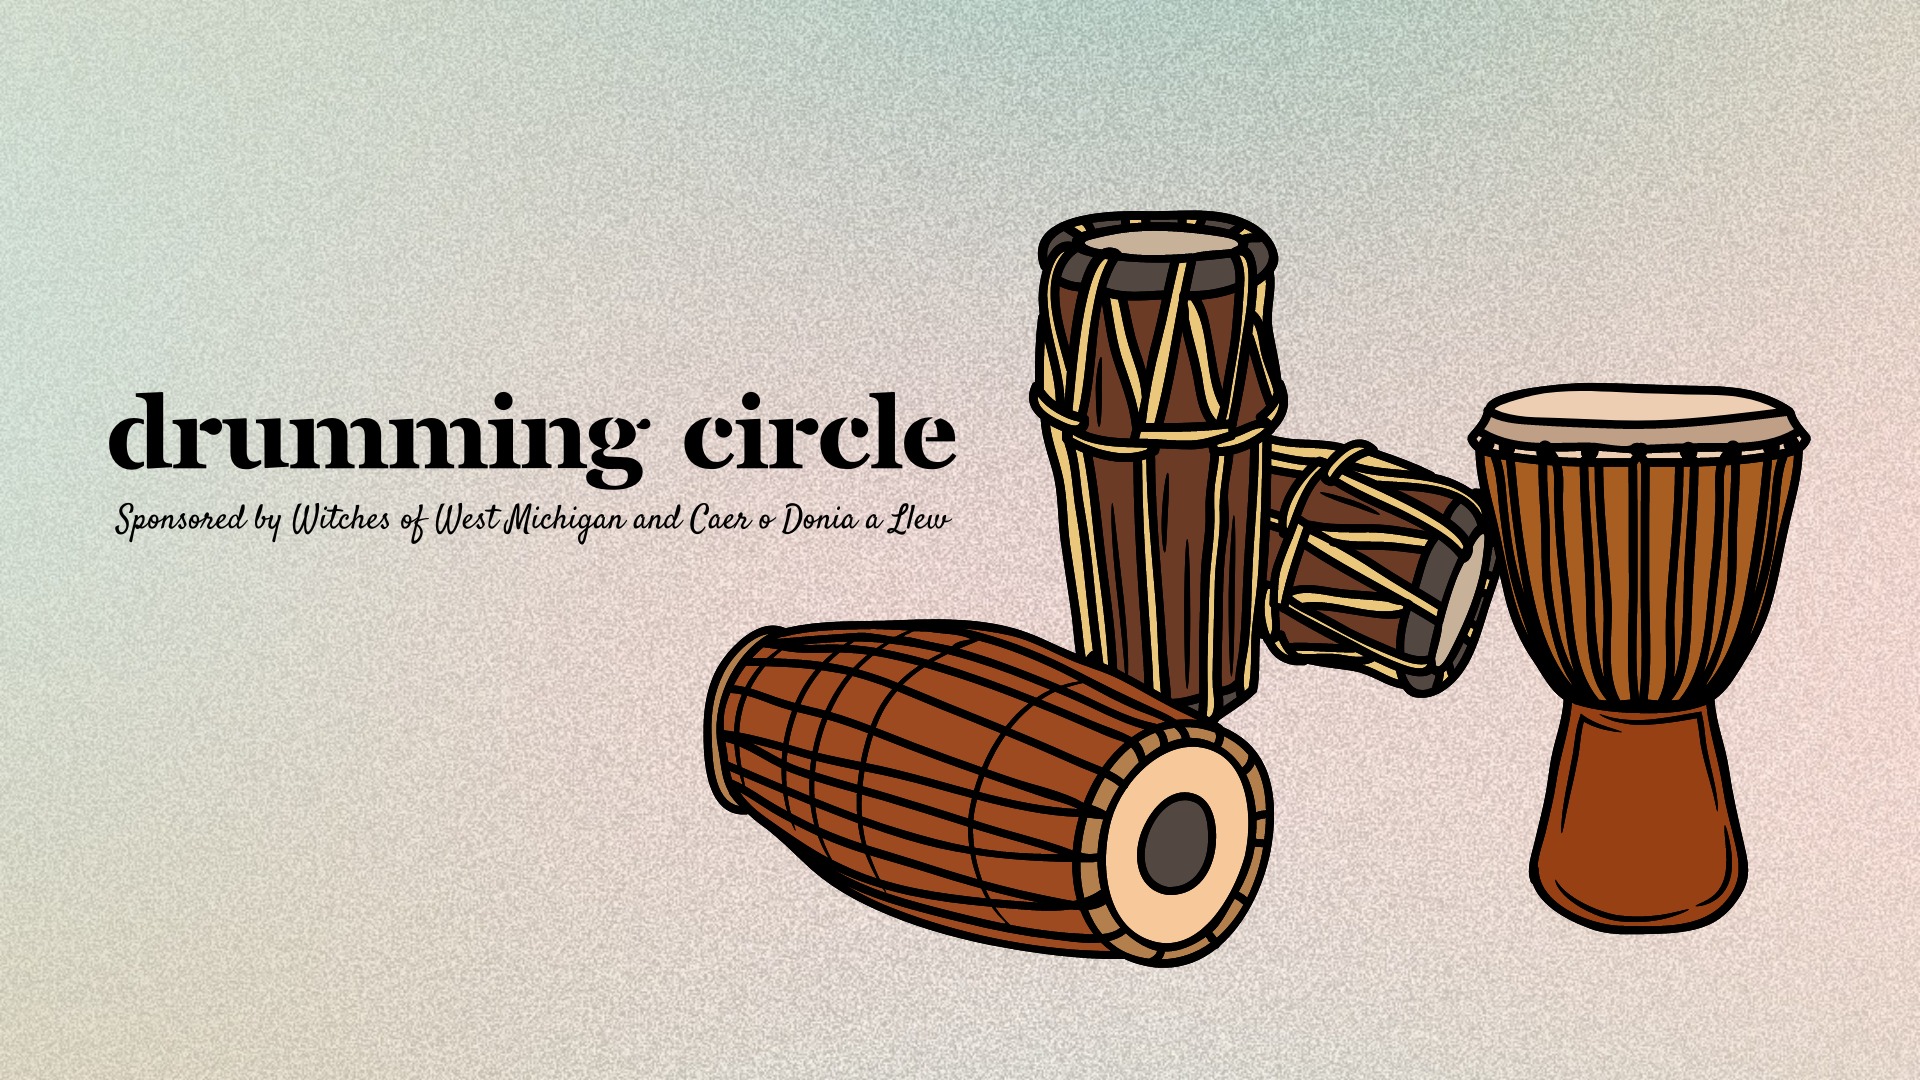 witches of west michigan drum circle logo